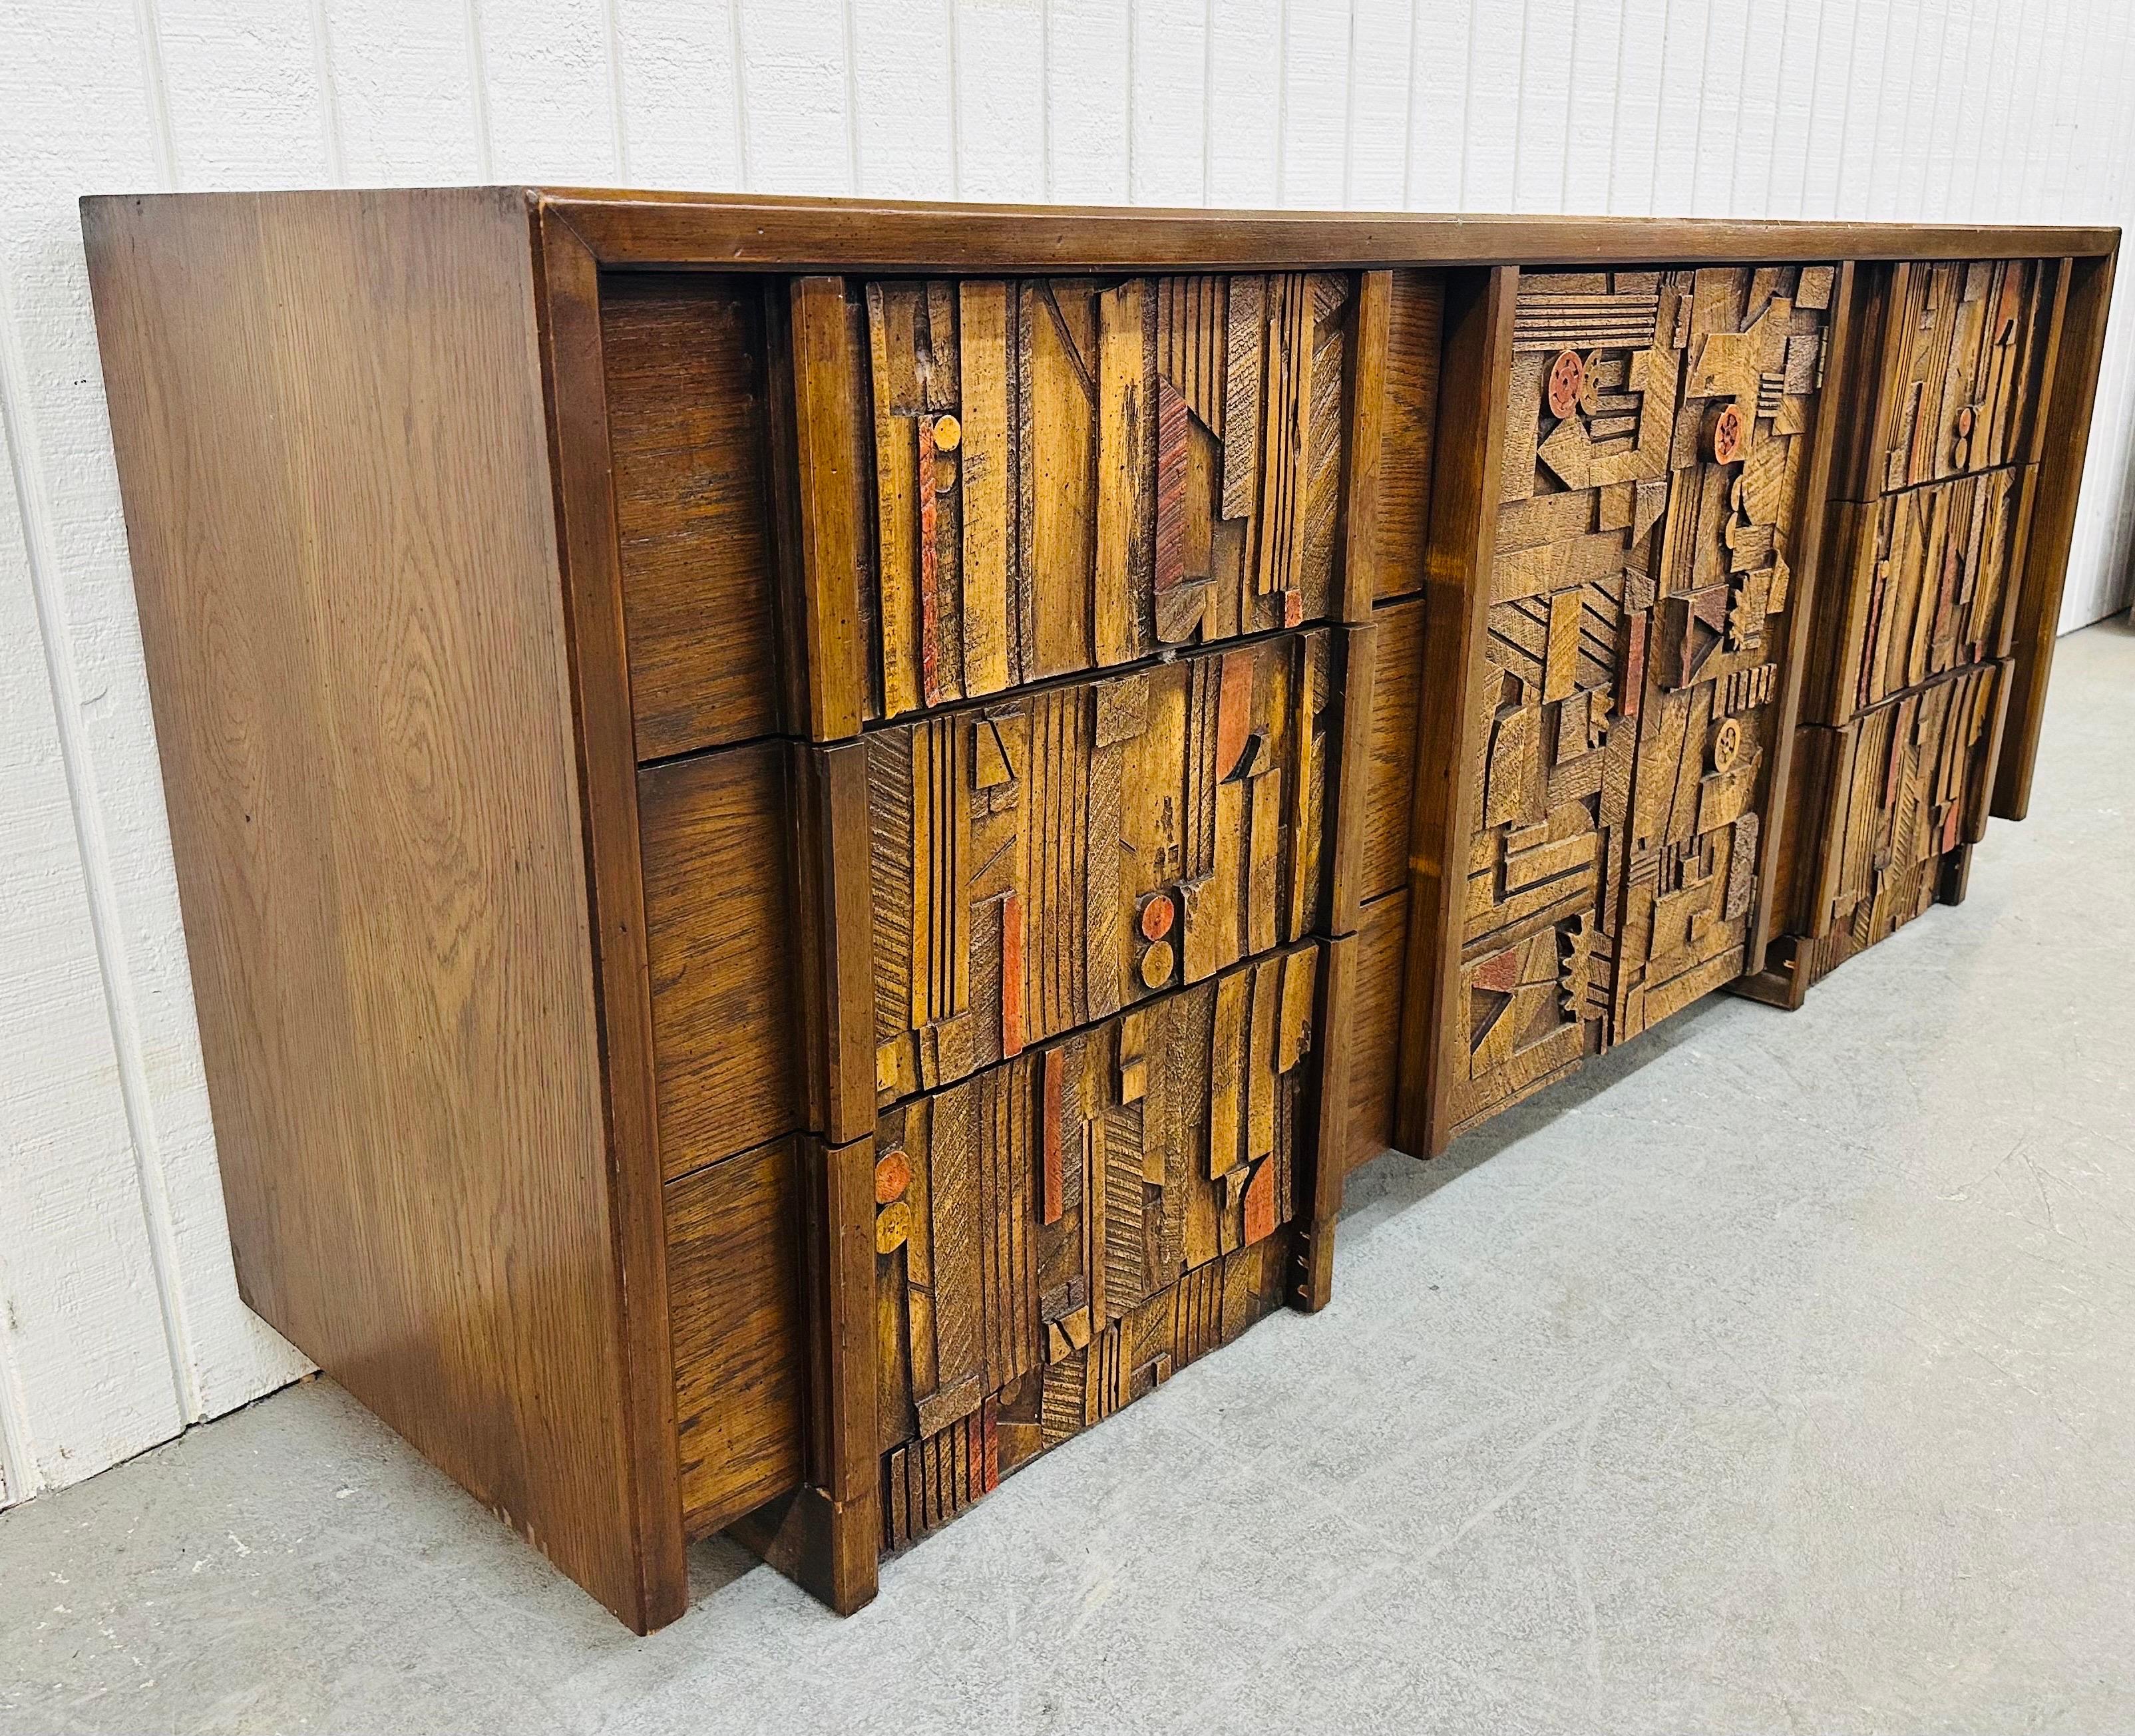 This listing is for a Mid-Century Modern Lane Pueblo Brutalist 9-Drawer Dresser. Featuring a straight line design, three large drawers on each side, center doors that open up to three hidden drawers, a brutalist geometrical Pueblo design across the